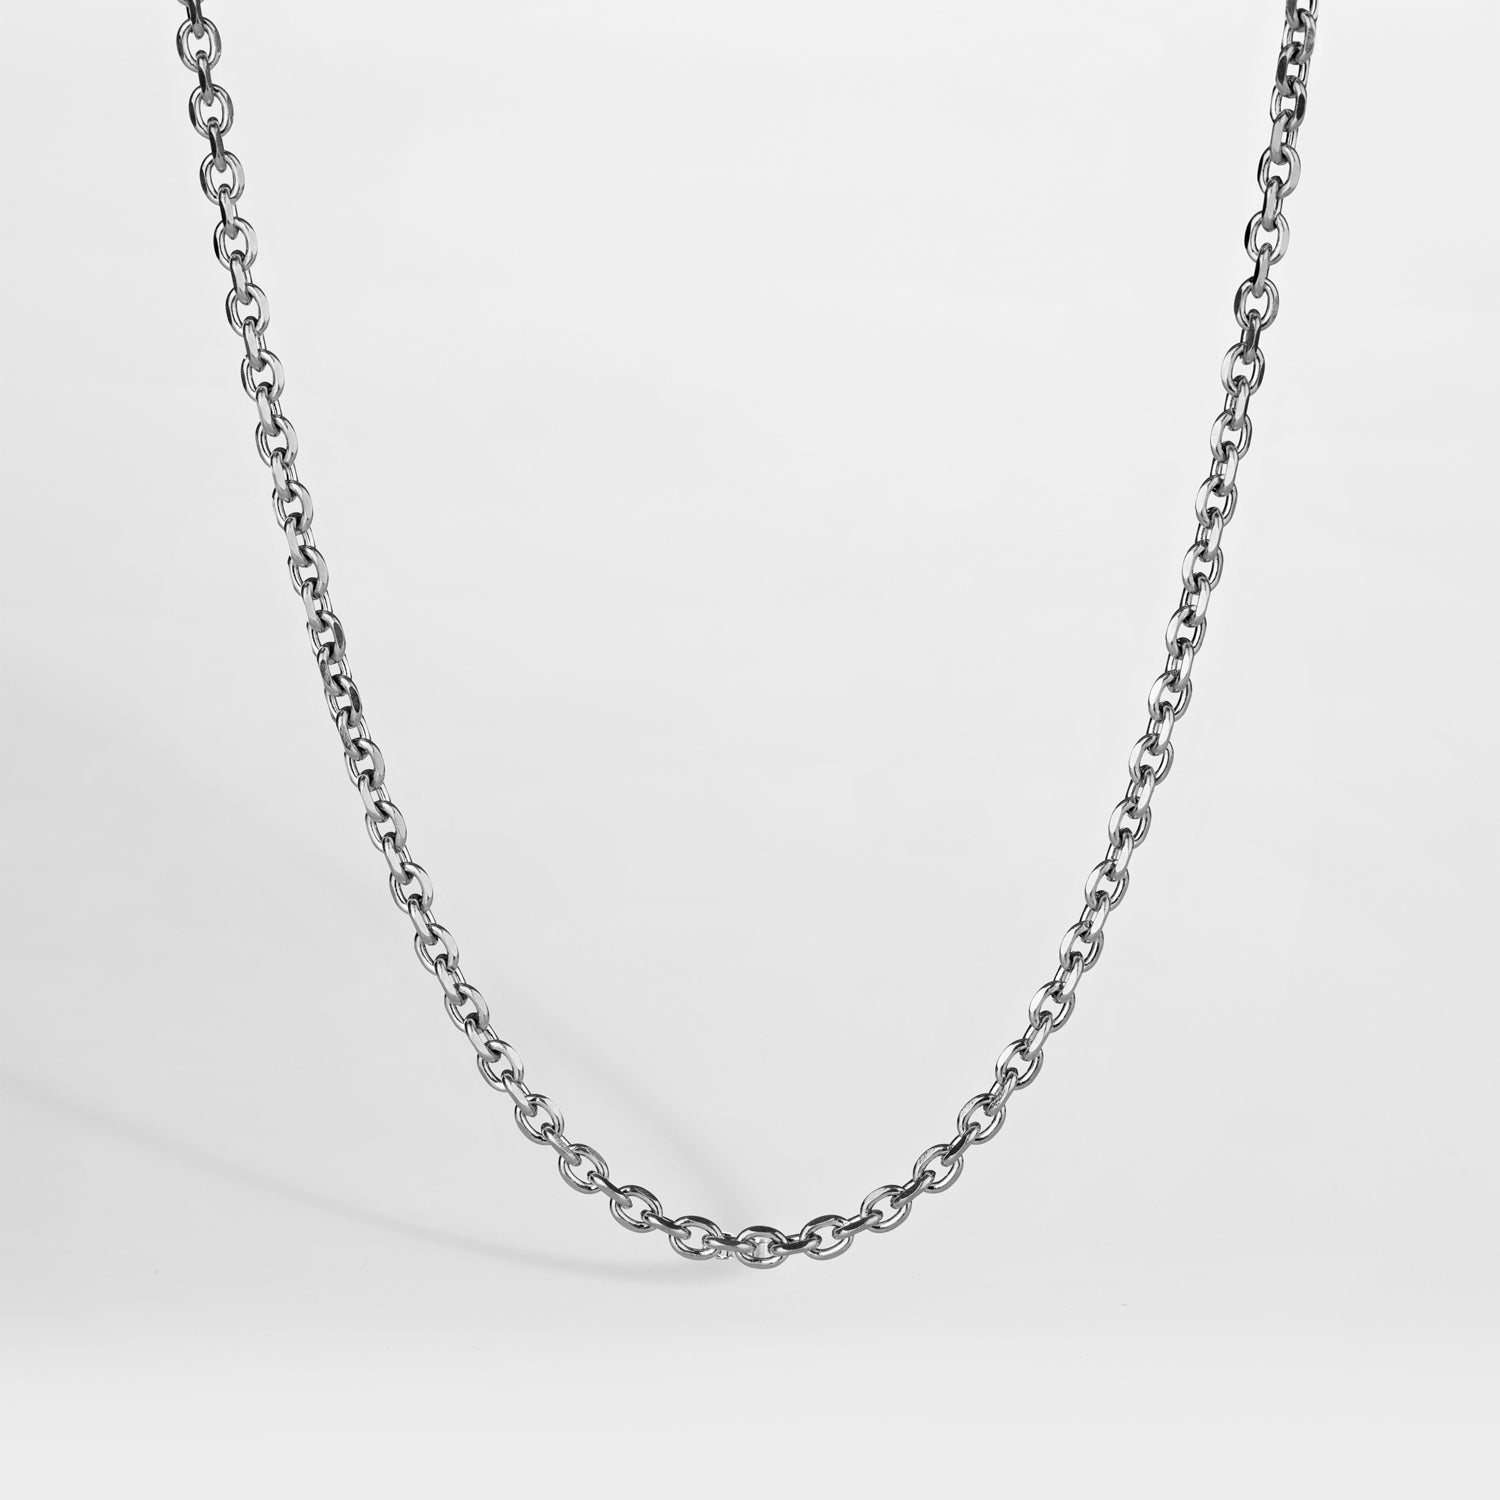 NL Cable necklace - Silver-toned